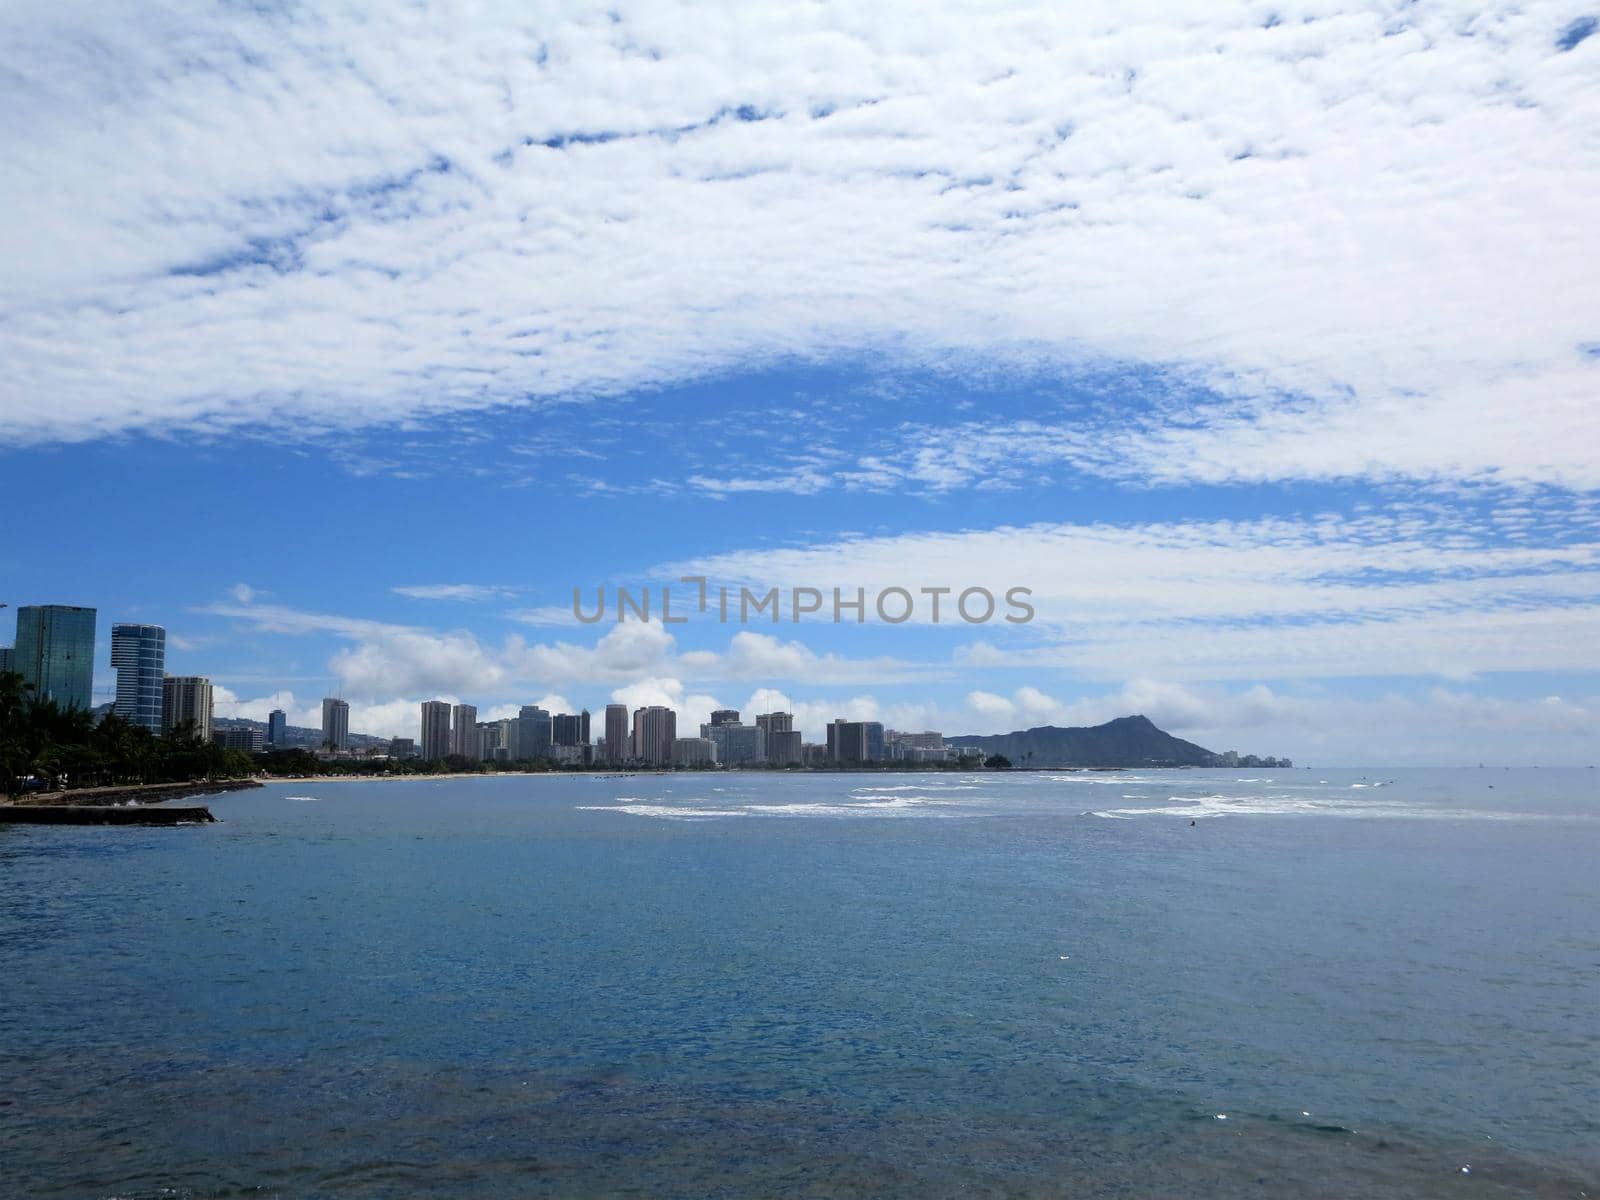 Ala Moana Beach Park with buildings of Honolulu, Waikiki and iconic Diamondhead in the distance during a beautiful day by EricGBVD